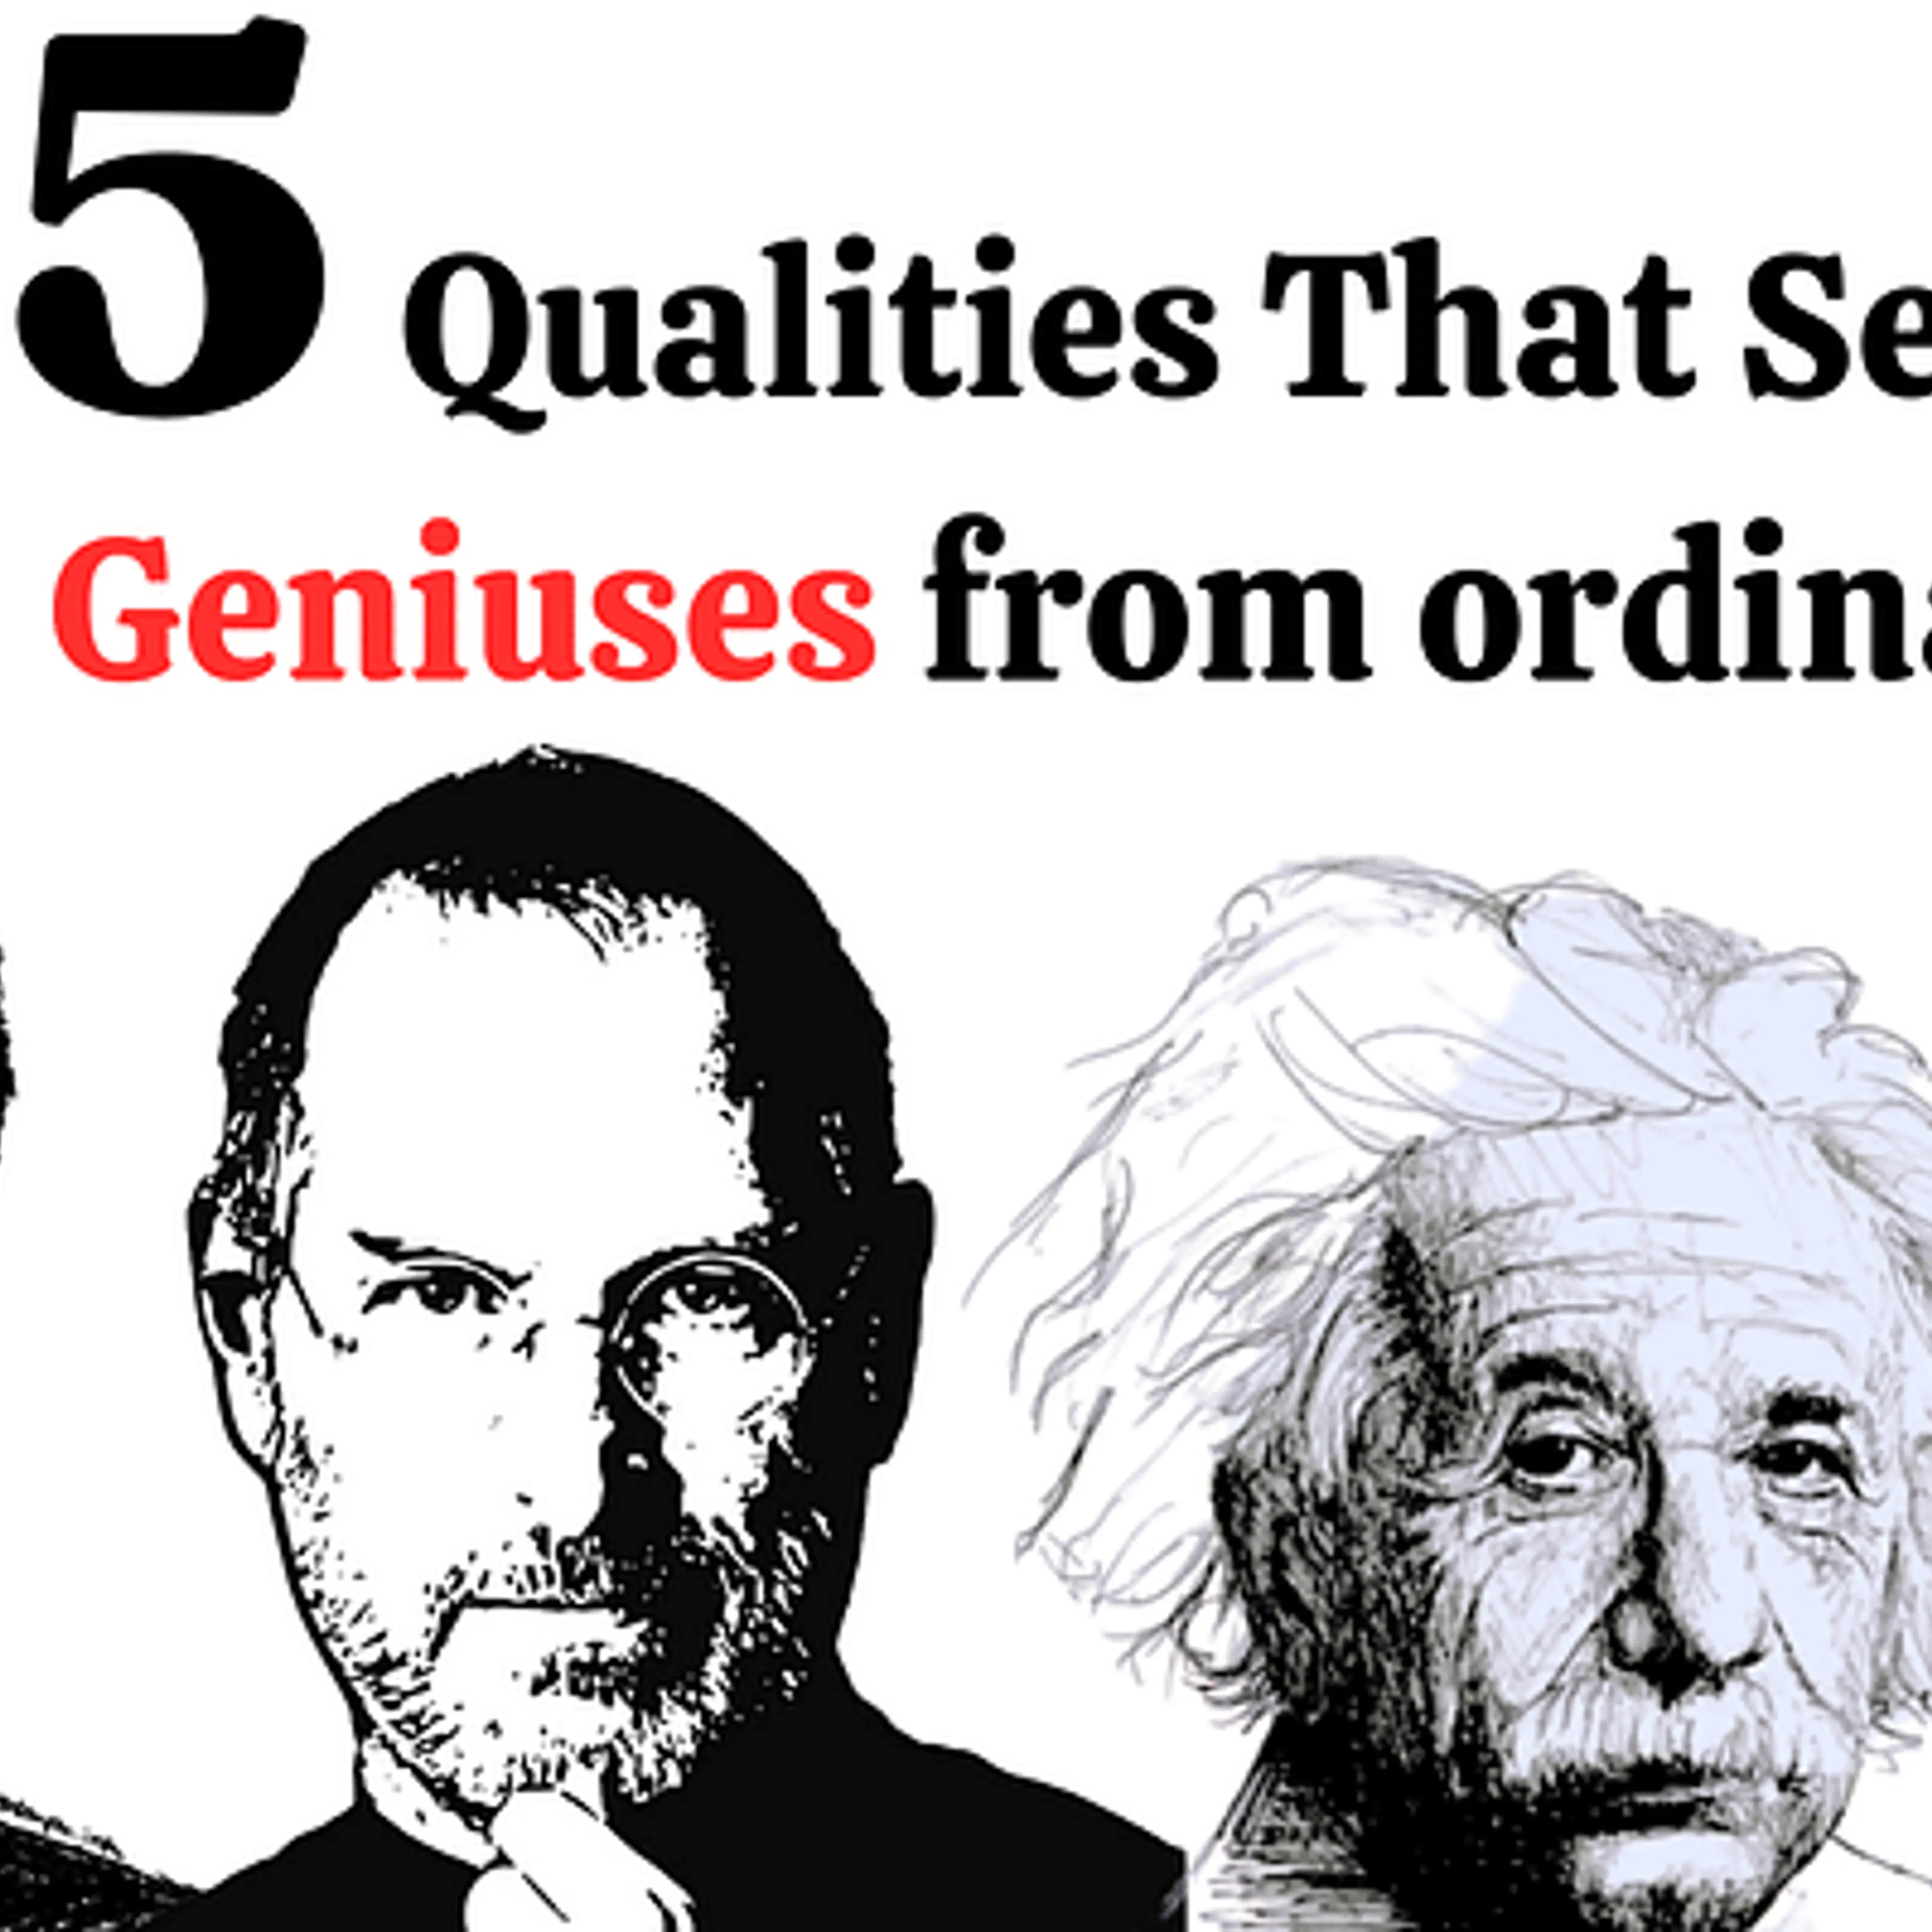 5 Unique Qualities That Separate Geniuses from ordinary people

